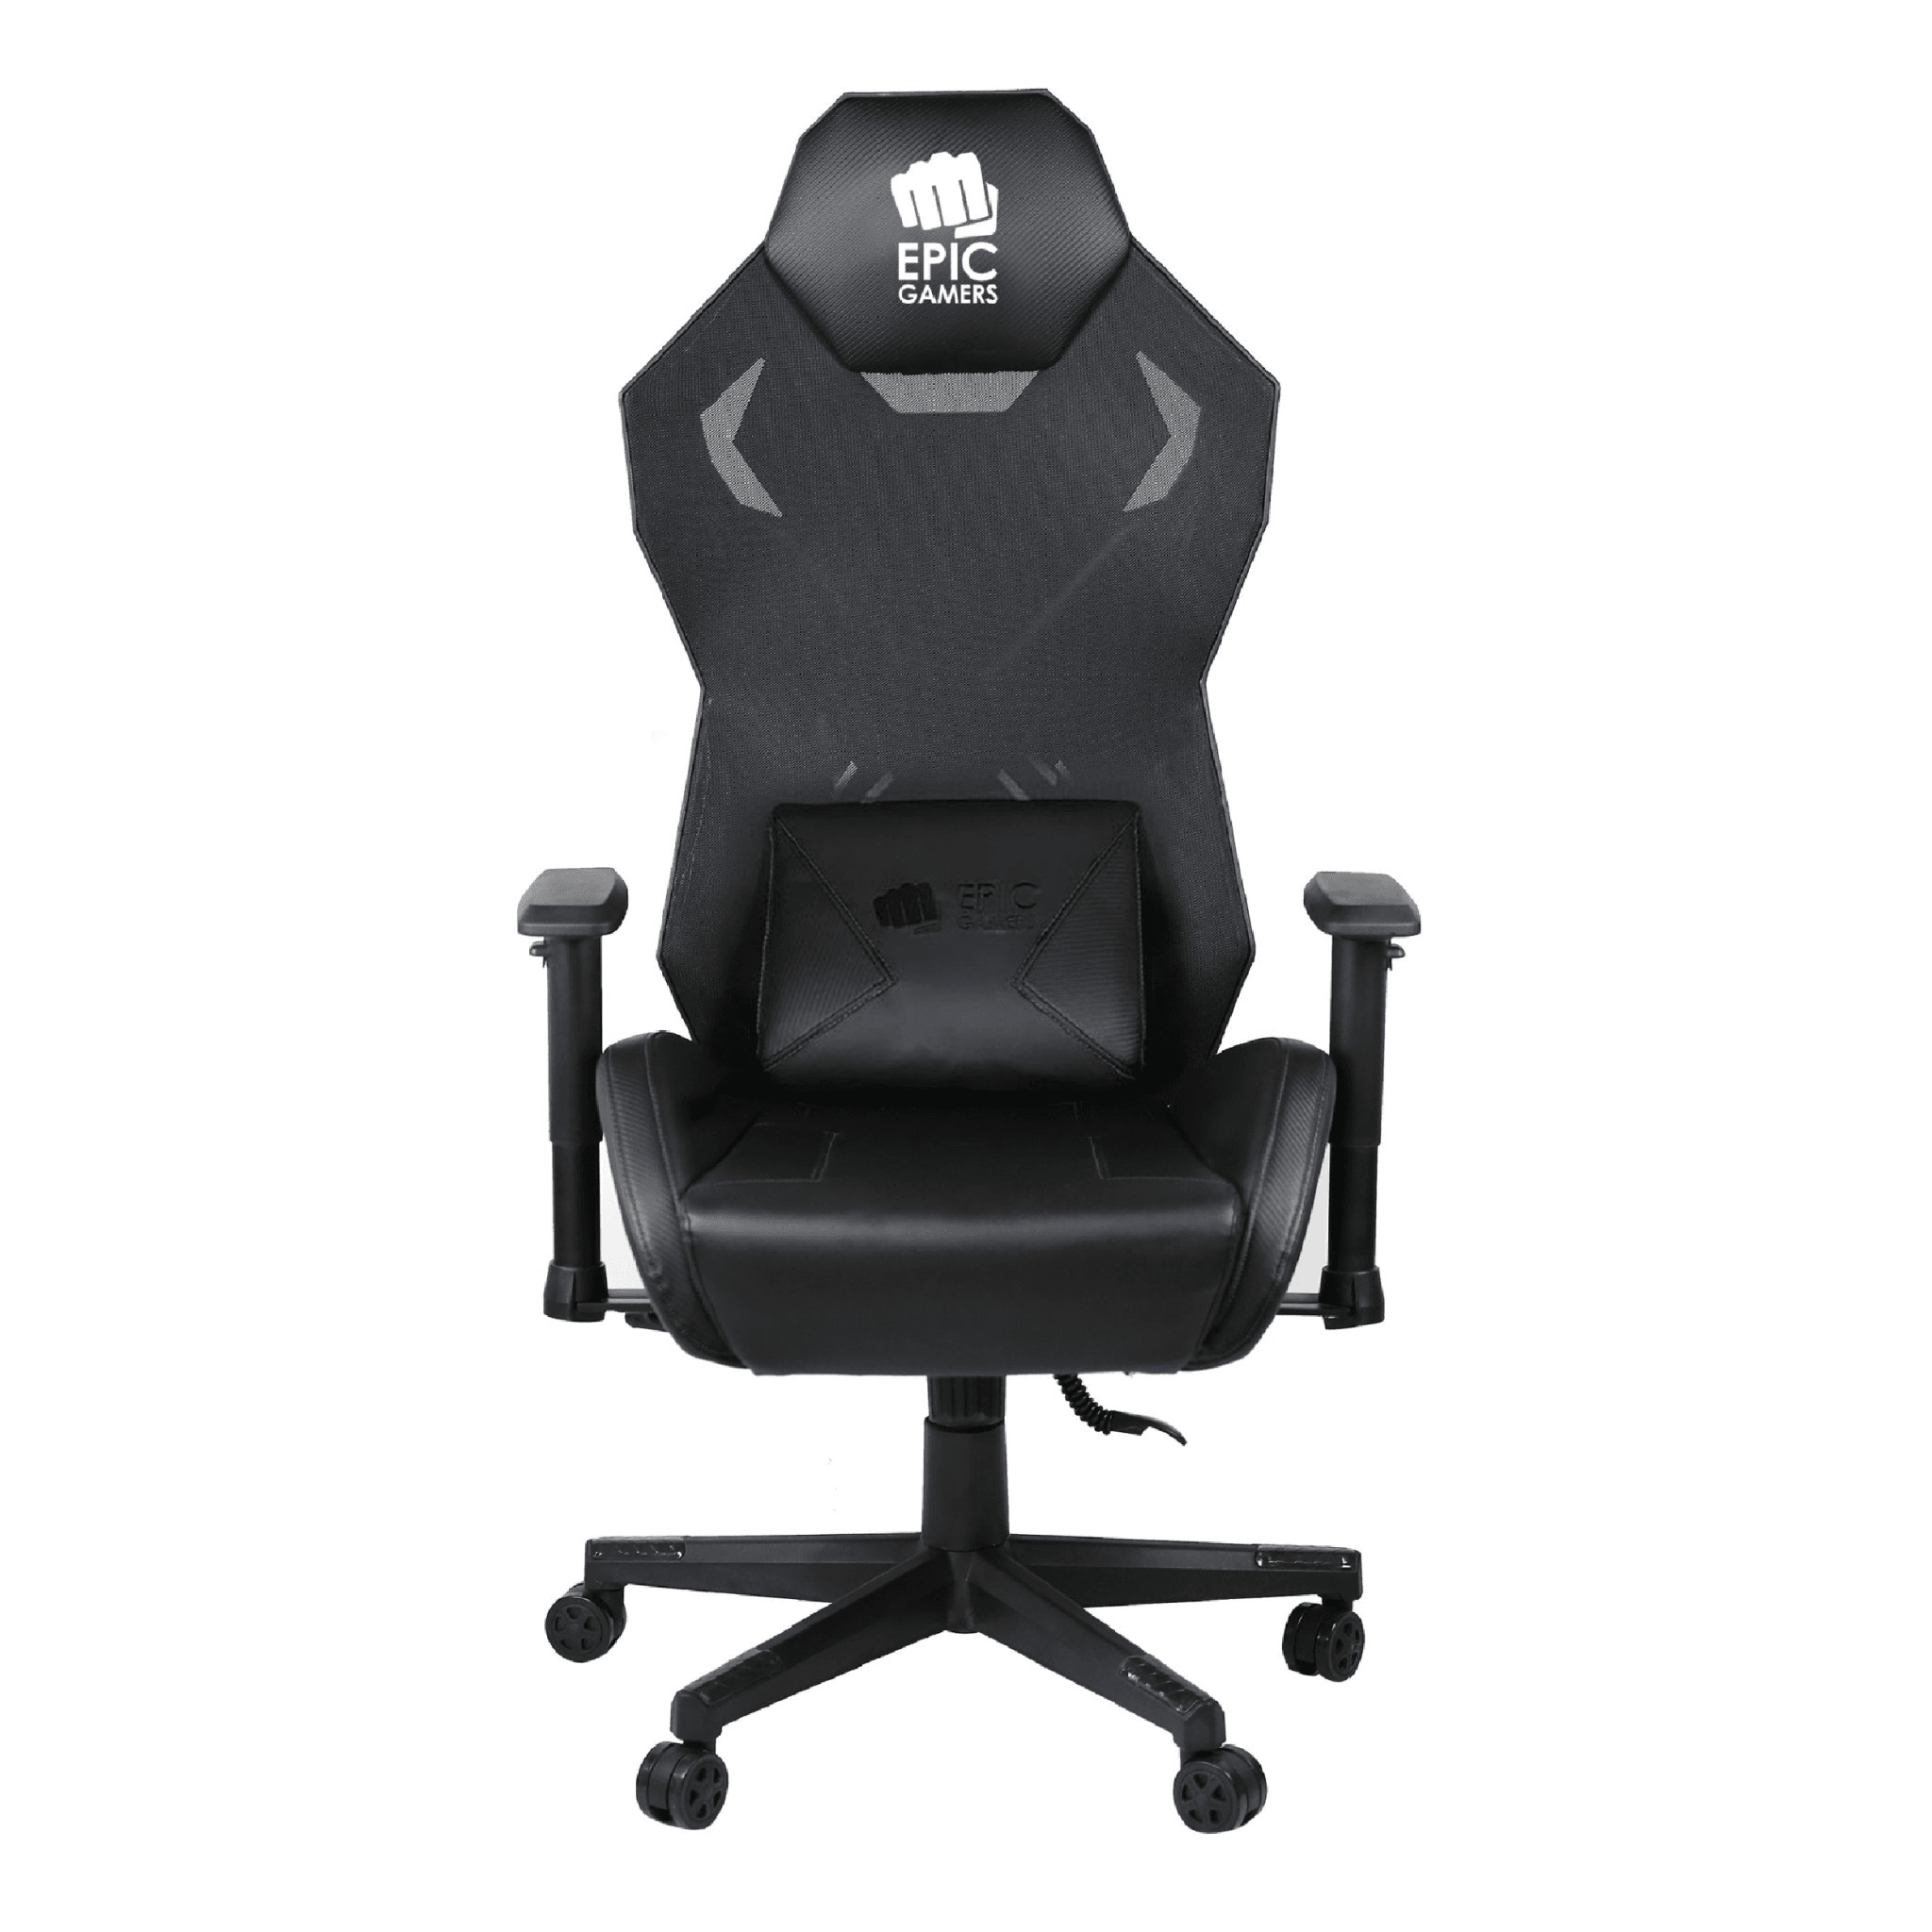 Epic Gamers Gaming Chair Model 2 - Black - Store 974 | ستور ٩٧٤